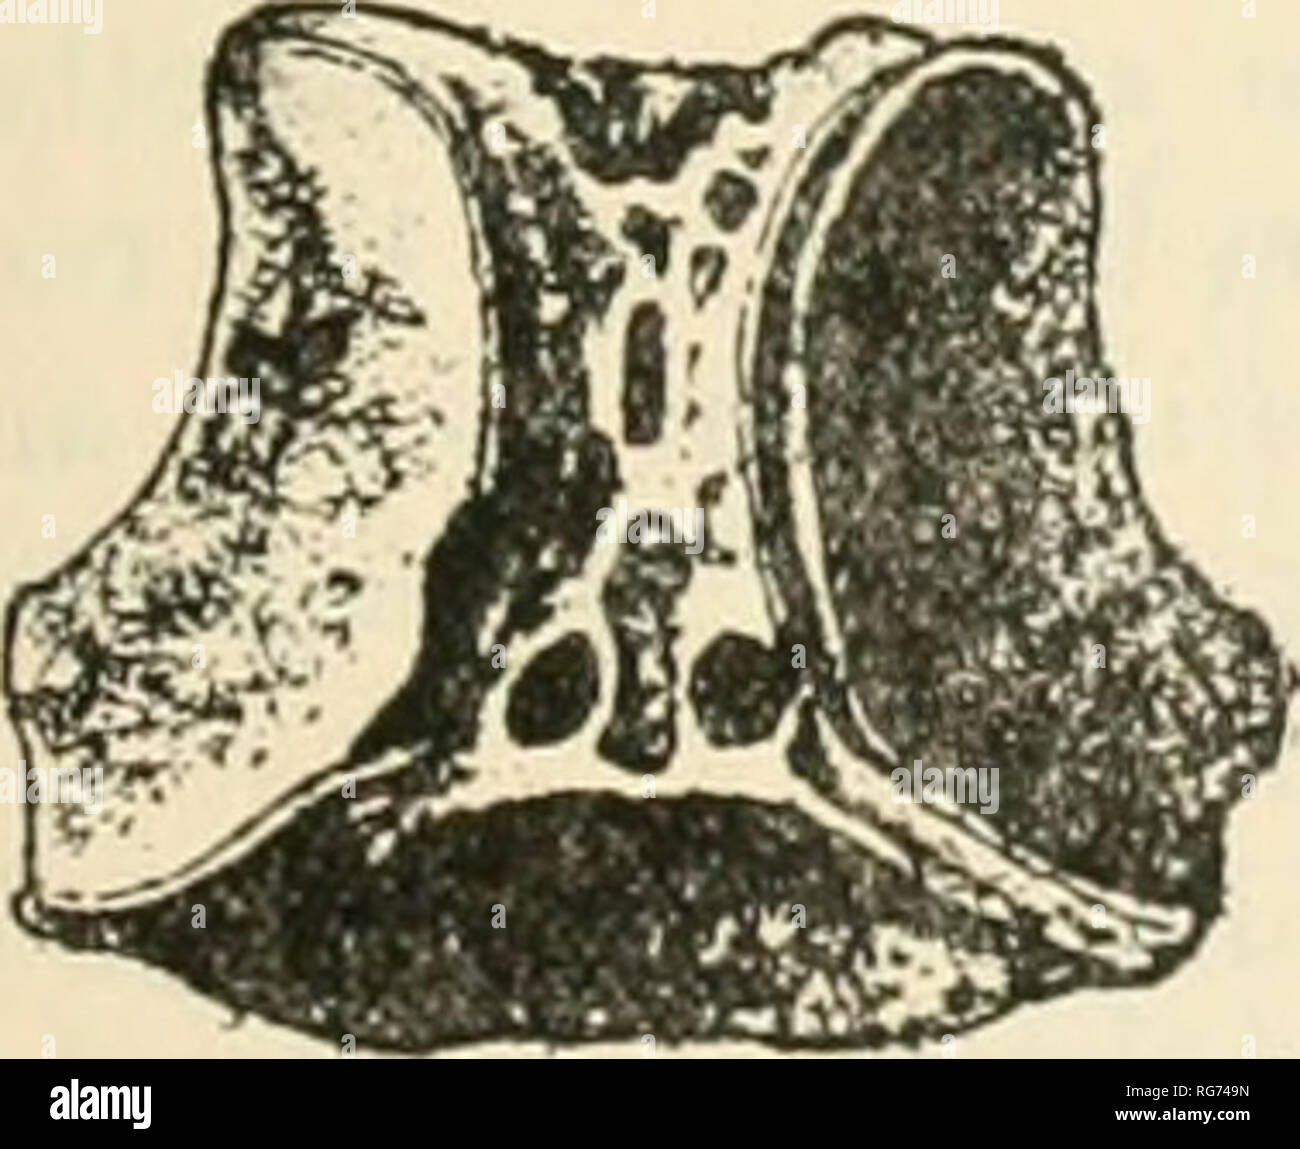 . Bulletin - United States National Museum. Science. FlO. 443.. Fig. 444. FlQ. 445. Fig. 440. FiG3. 433-146.—433, Dorsal face of a radial from a spf-cimen of Comanthvs pabvictrra from the Phillippdie Islands (AFTER p. H. Carpenter). 434, Dorsal face of a radial from a specimen of Comanthus pAR^^aRRA from the Thil- IPPINE Islands (after P.n. Carpenter). 435, Ventral face of a radial from a .specimen of Comaxtiiu.s paem- VICIRRA FROM THE PHIUPPINE ISLANDS (AFTER P. U. CARPENTER). 430, VENTRAL FACE OF A RADIAL FROM A .SPECI- MEN OF COMANTHUS PARVICIRRA FROM THE PHILIPPINE ISLANDS (AFTER P. 11. CA Stock Photo